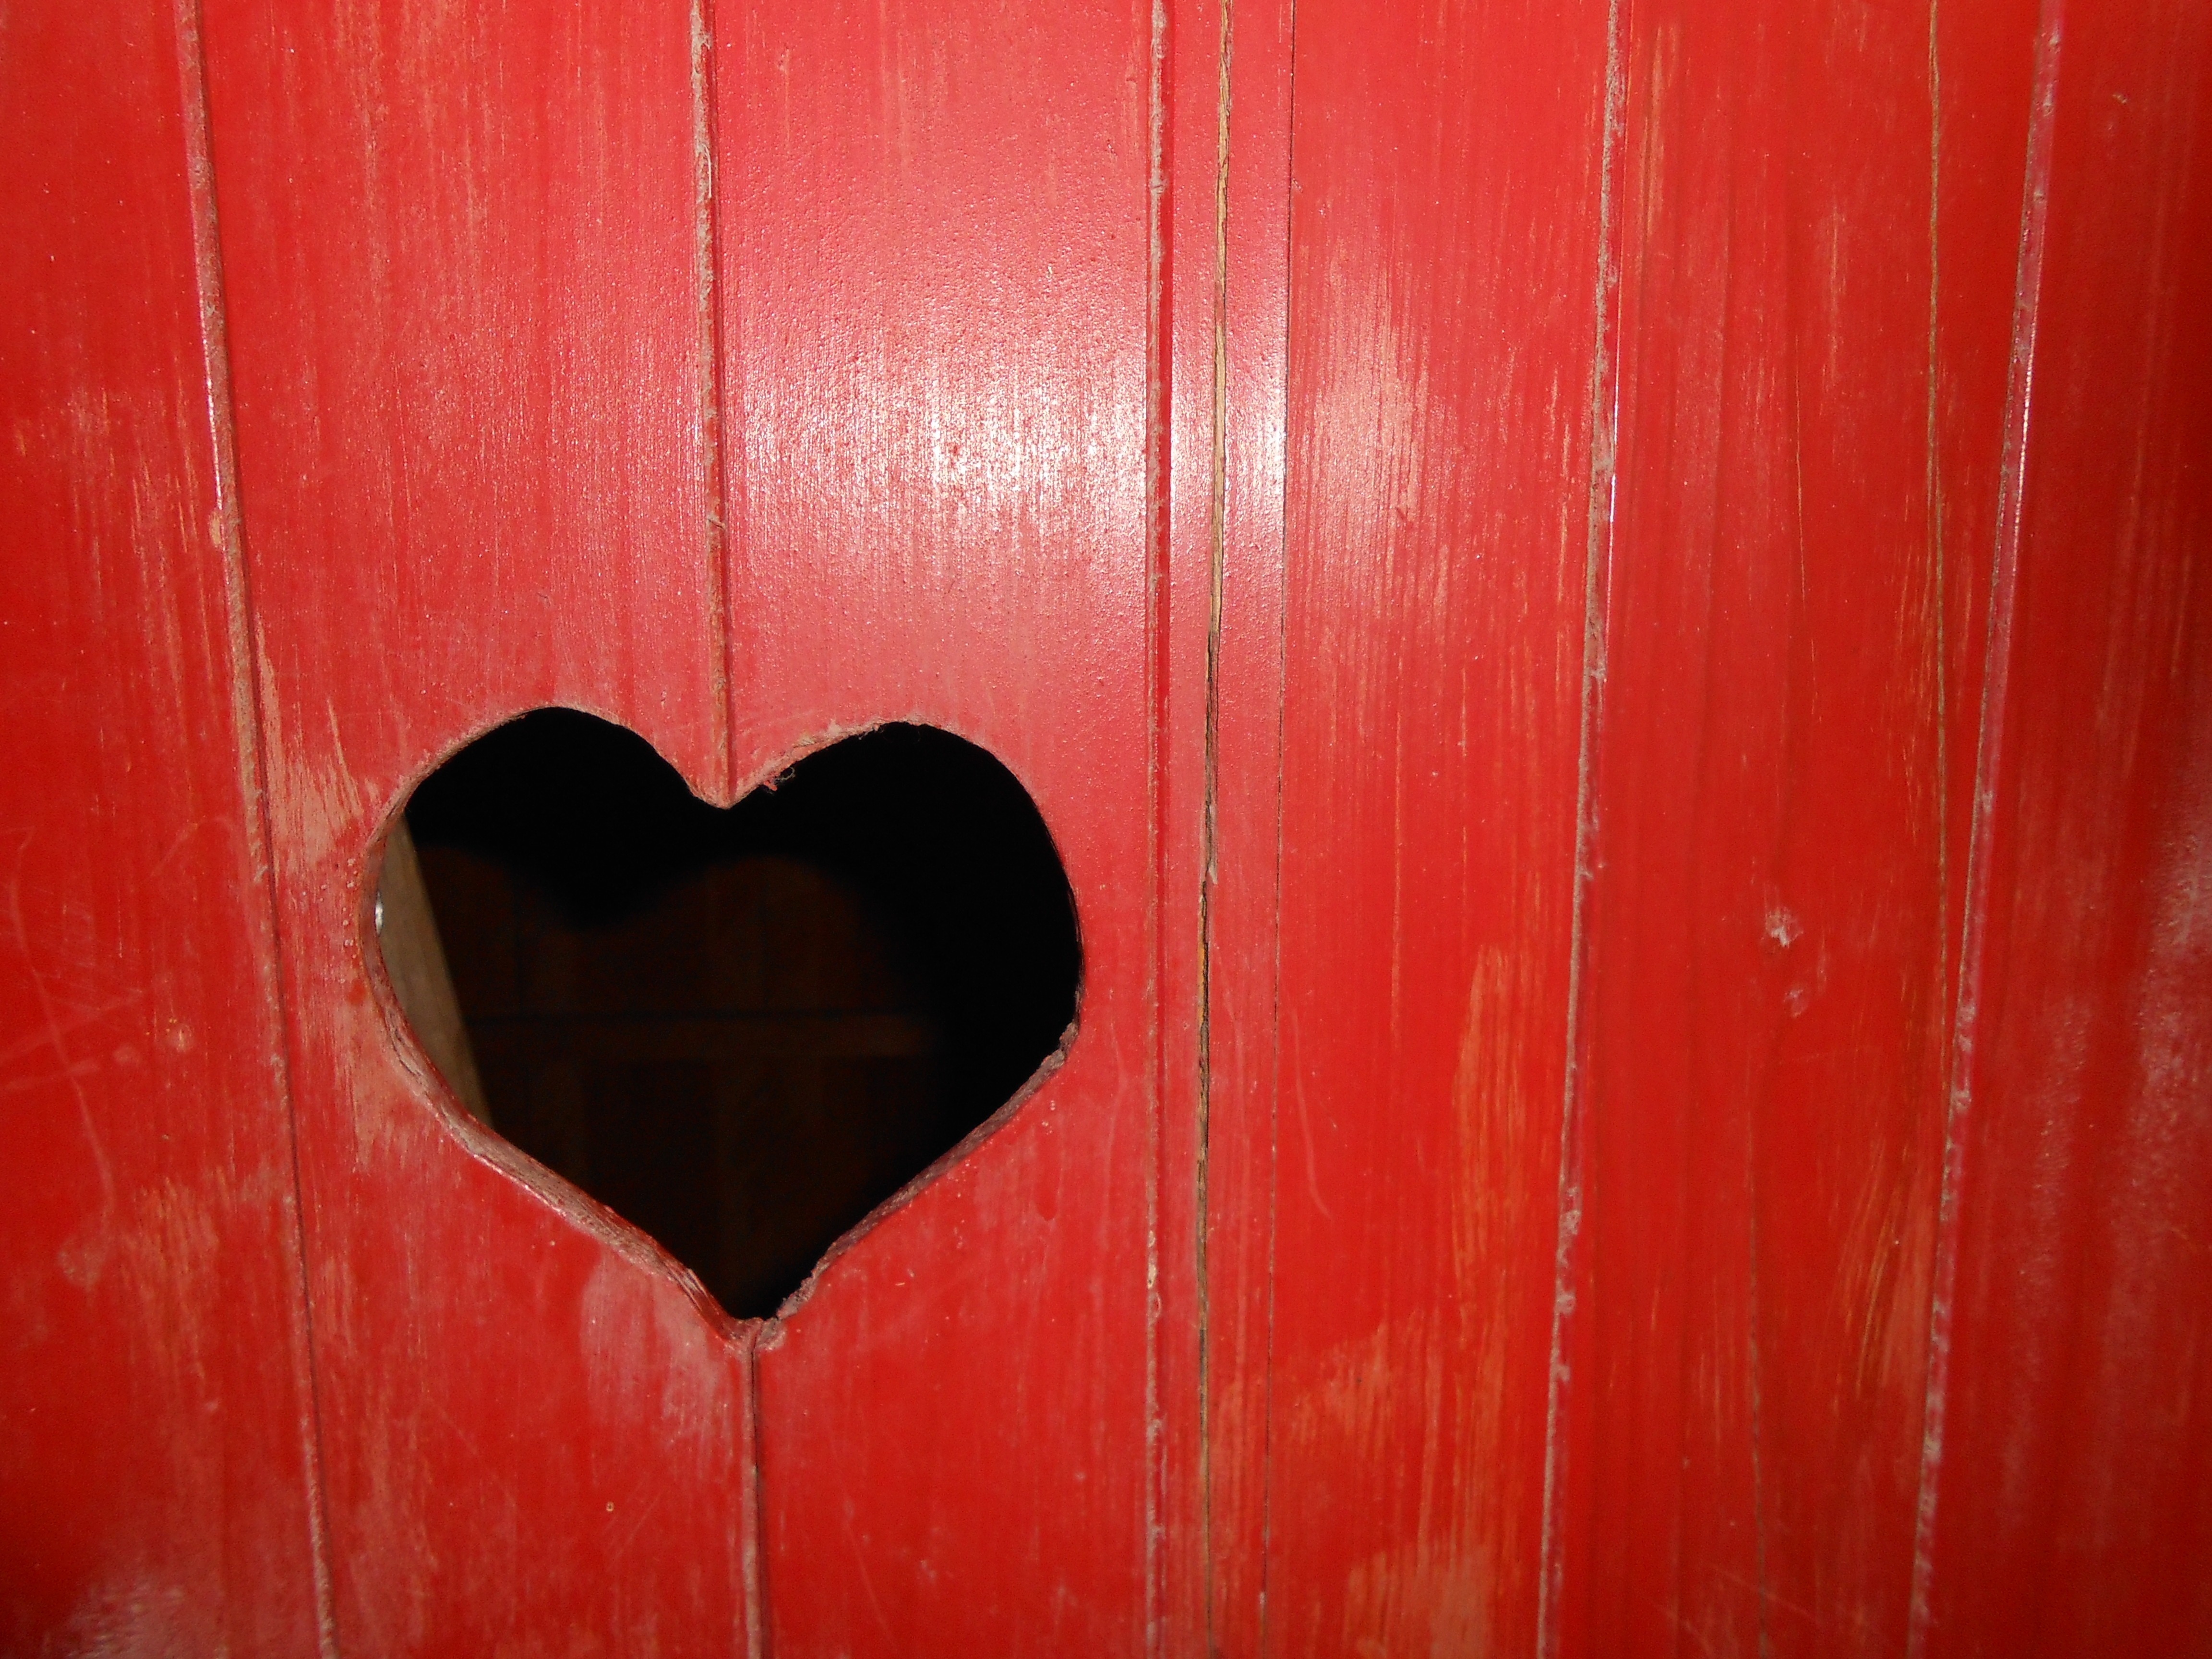 red wooden surface with heart slot